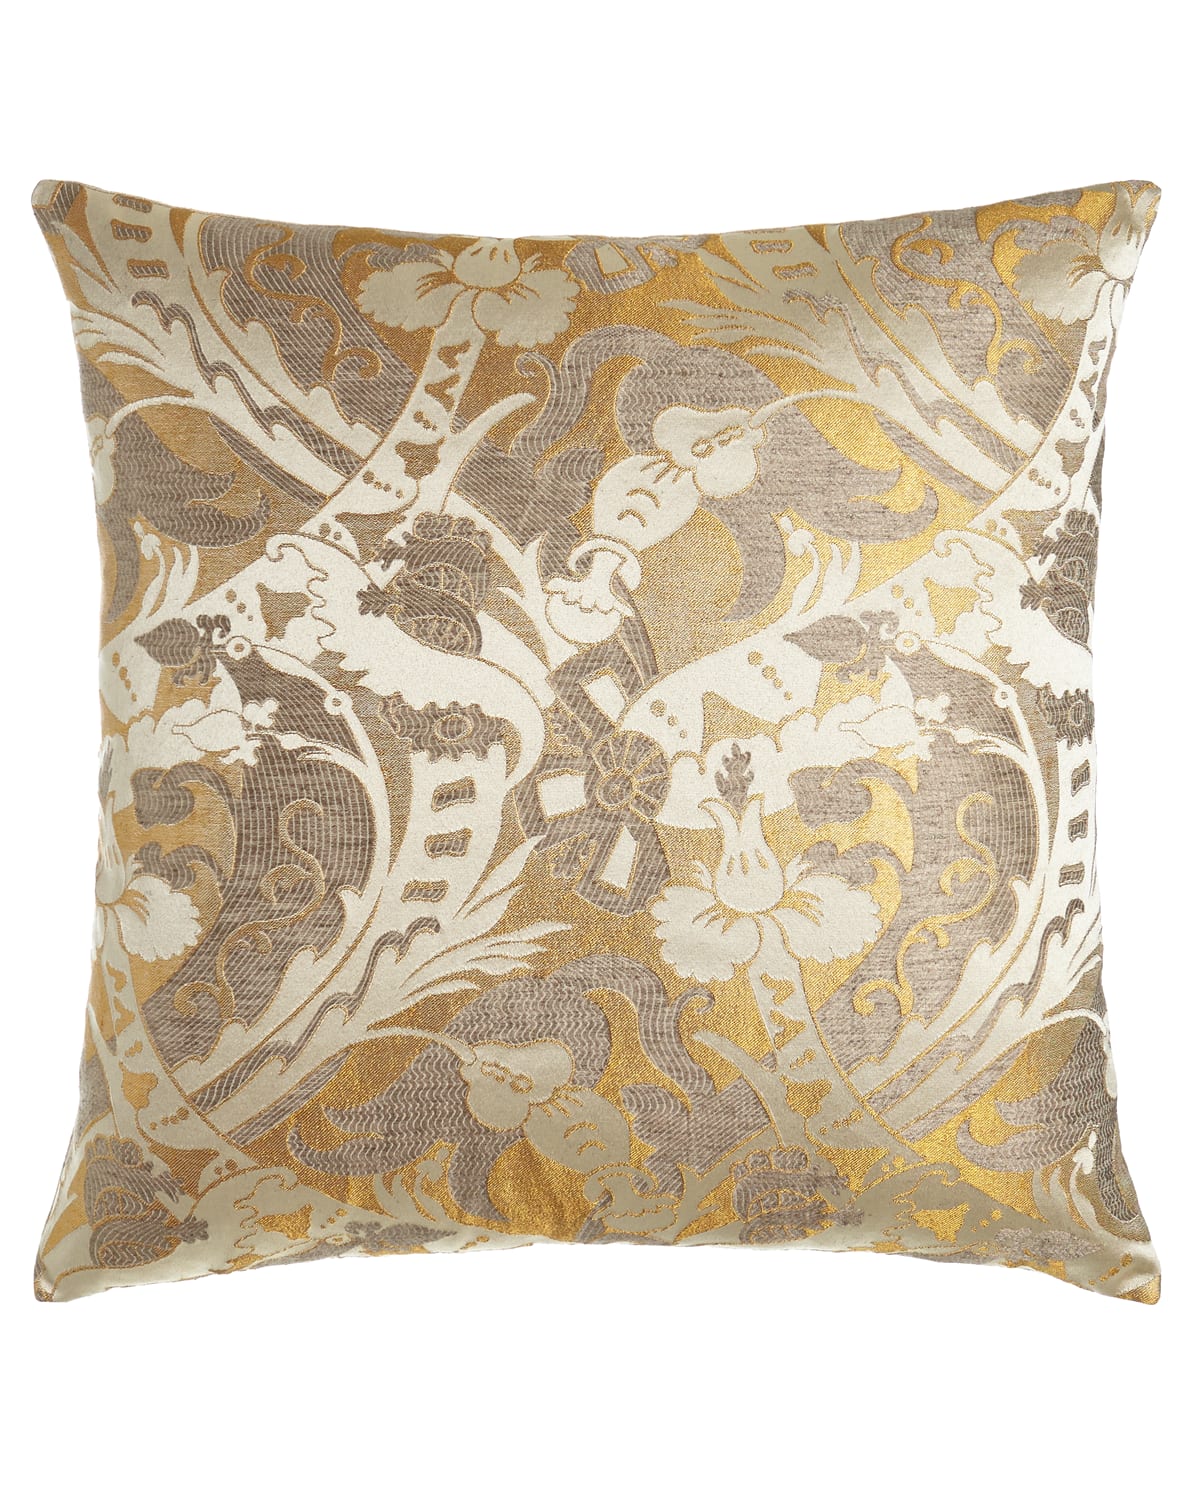 Image Square Feathers D'Or Fancy Pillow, 26"Sq.